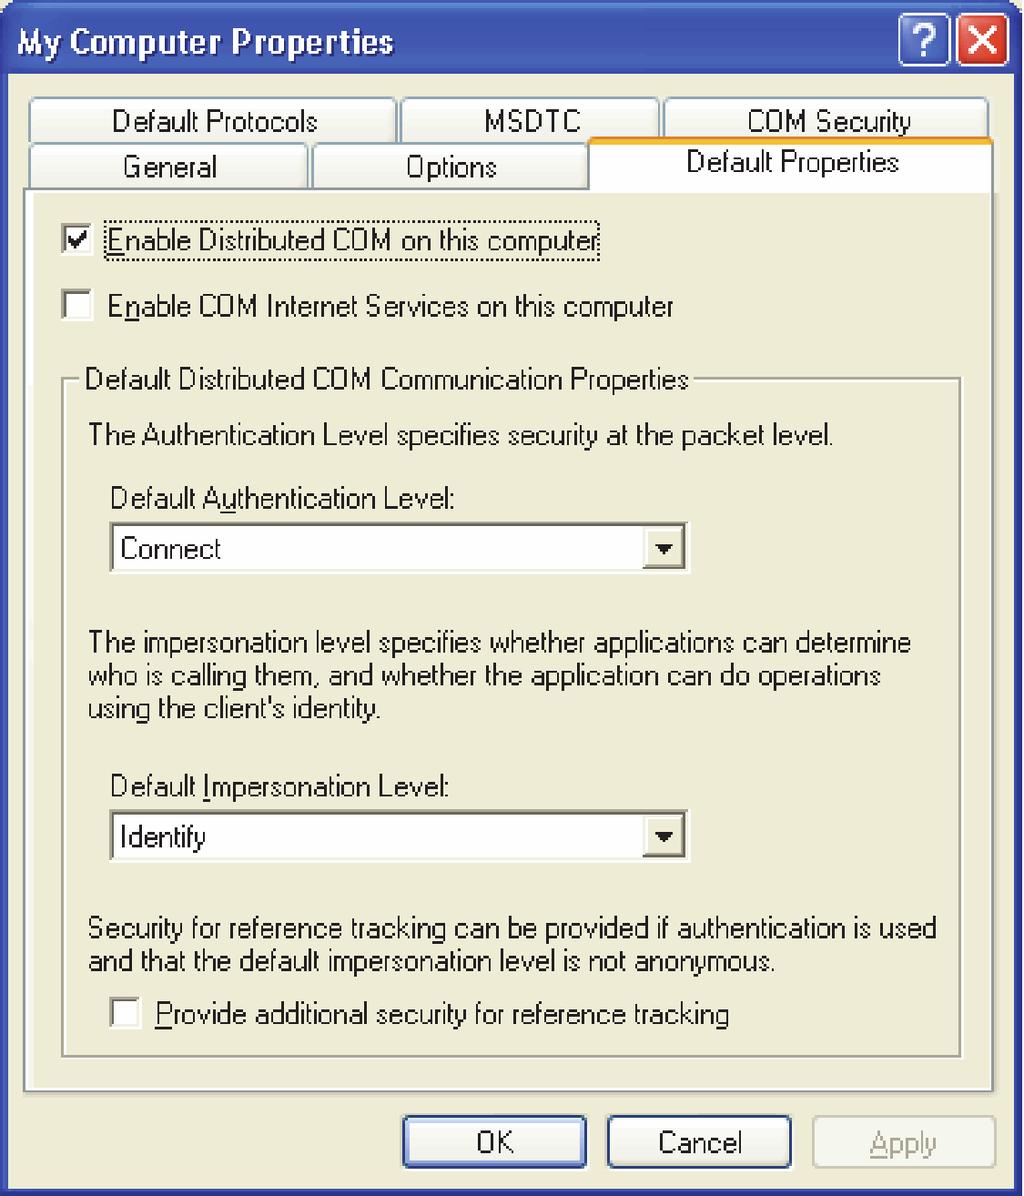 4. In the My Computer Properties dialog box (see Figure 2-24 on page 48): a) Click the Default Properties tab. b) Select the Enable Distributed COM on this computer check box.